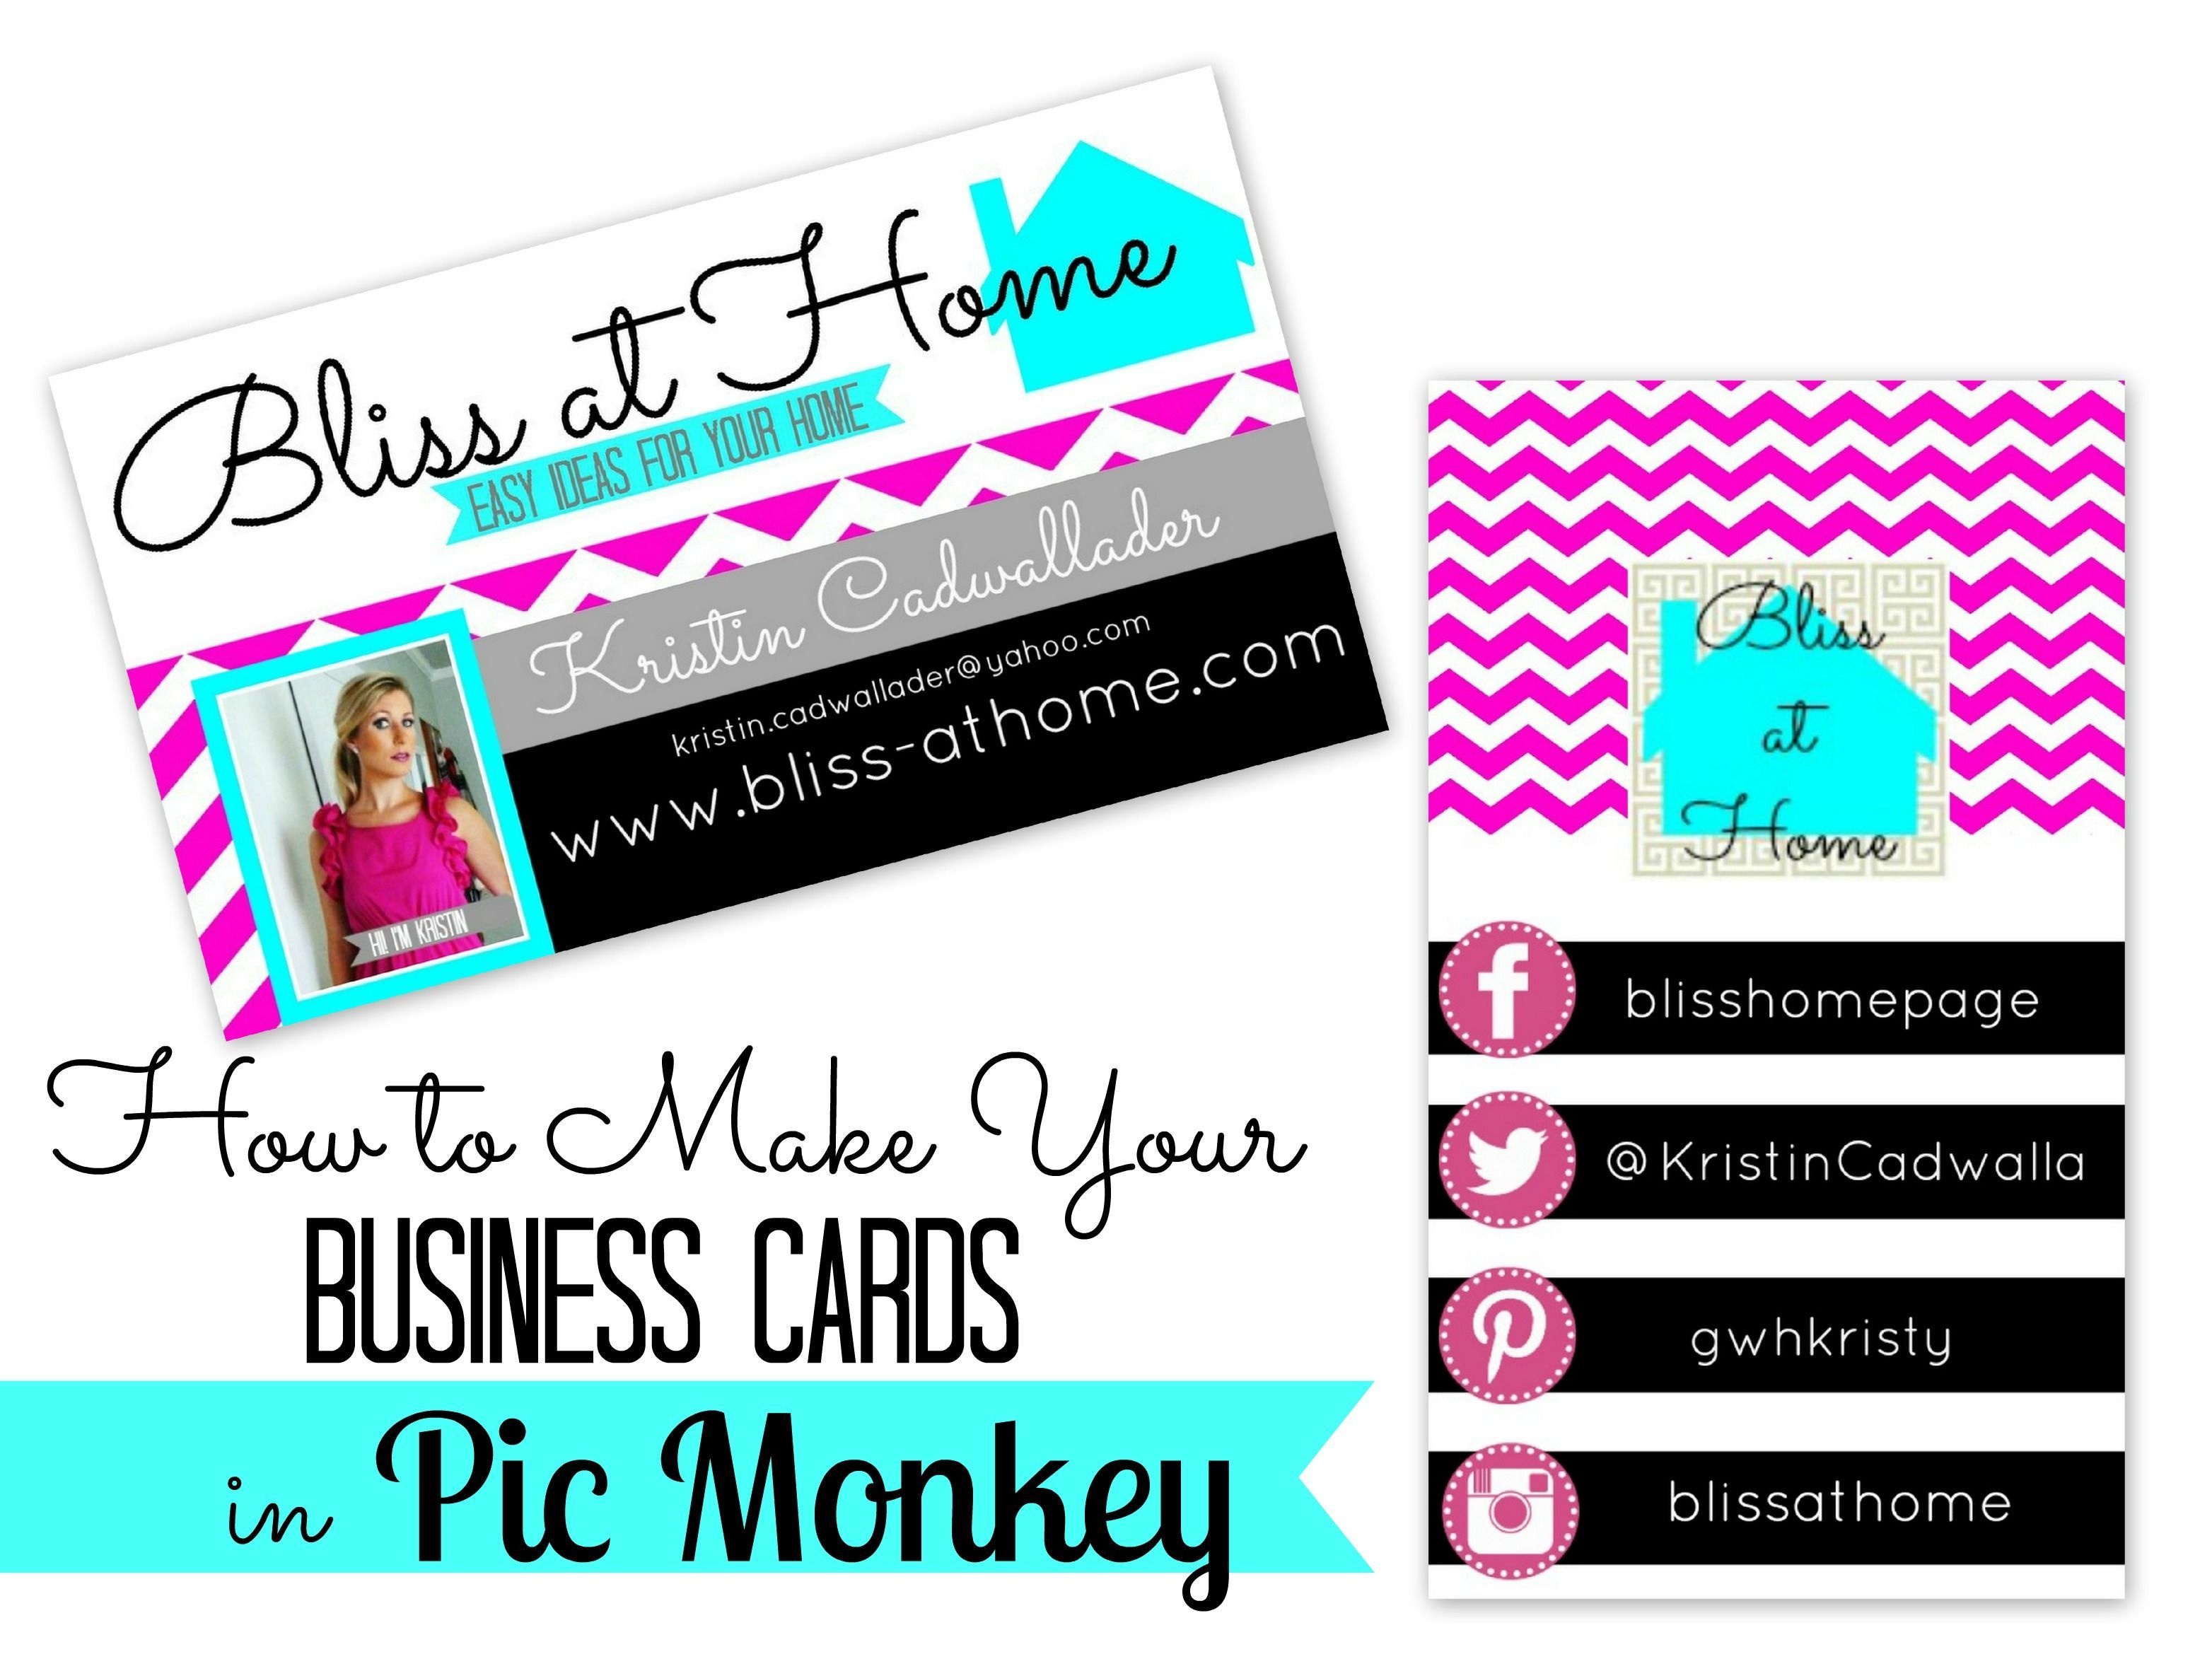 Design Your Make Your Own Business Cards Printable Online | Business - Make Your Own Business Cards Free Printable